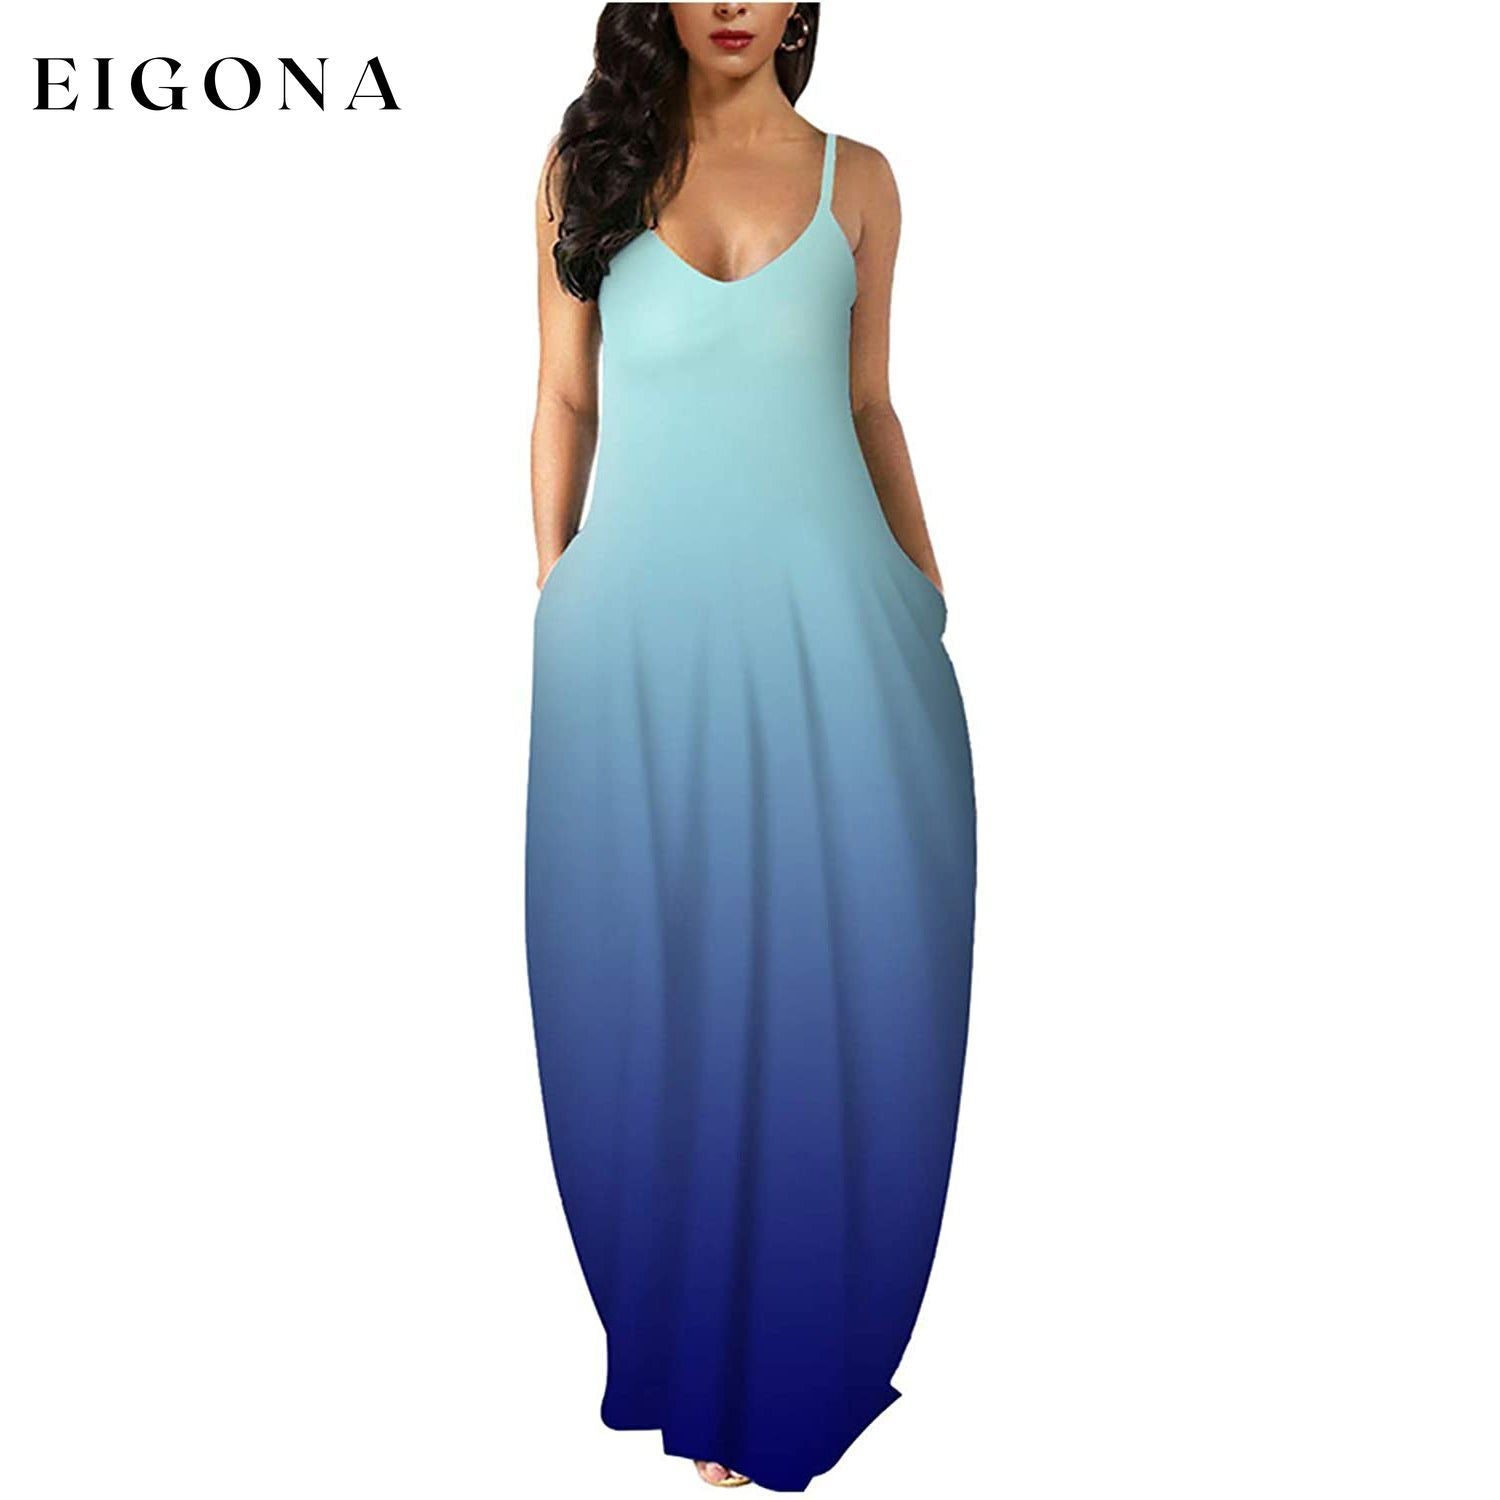 Womens Casual Sleeveless Plus Size Loose Plain Long Maxi Dress with Pockets Light Blue Navy __stock:200 casual dresses clothes dresses refund_fee:1200